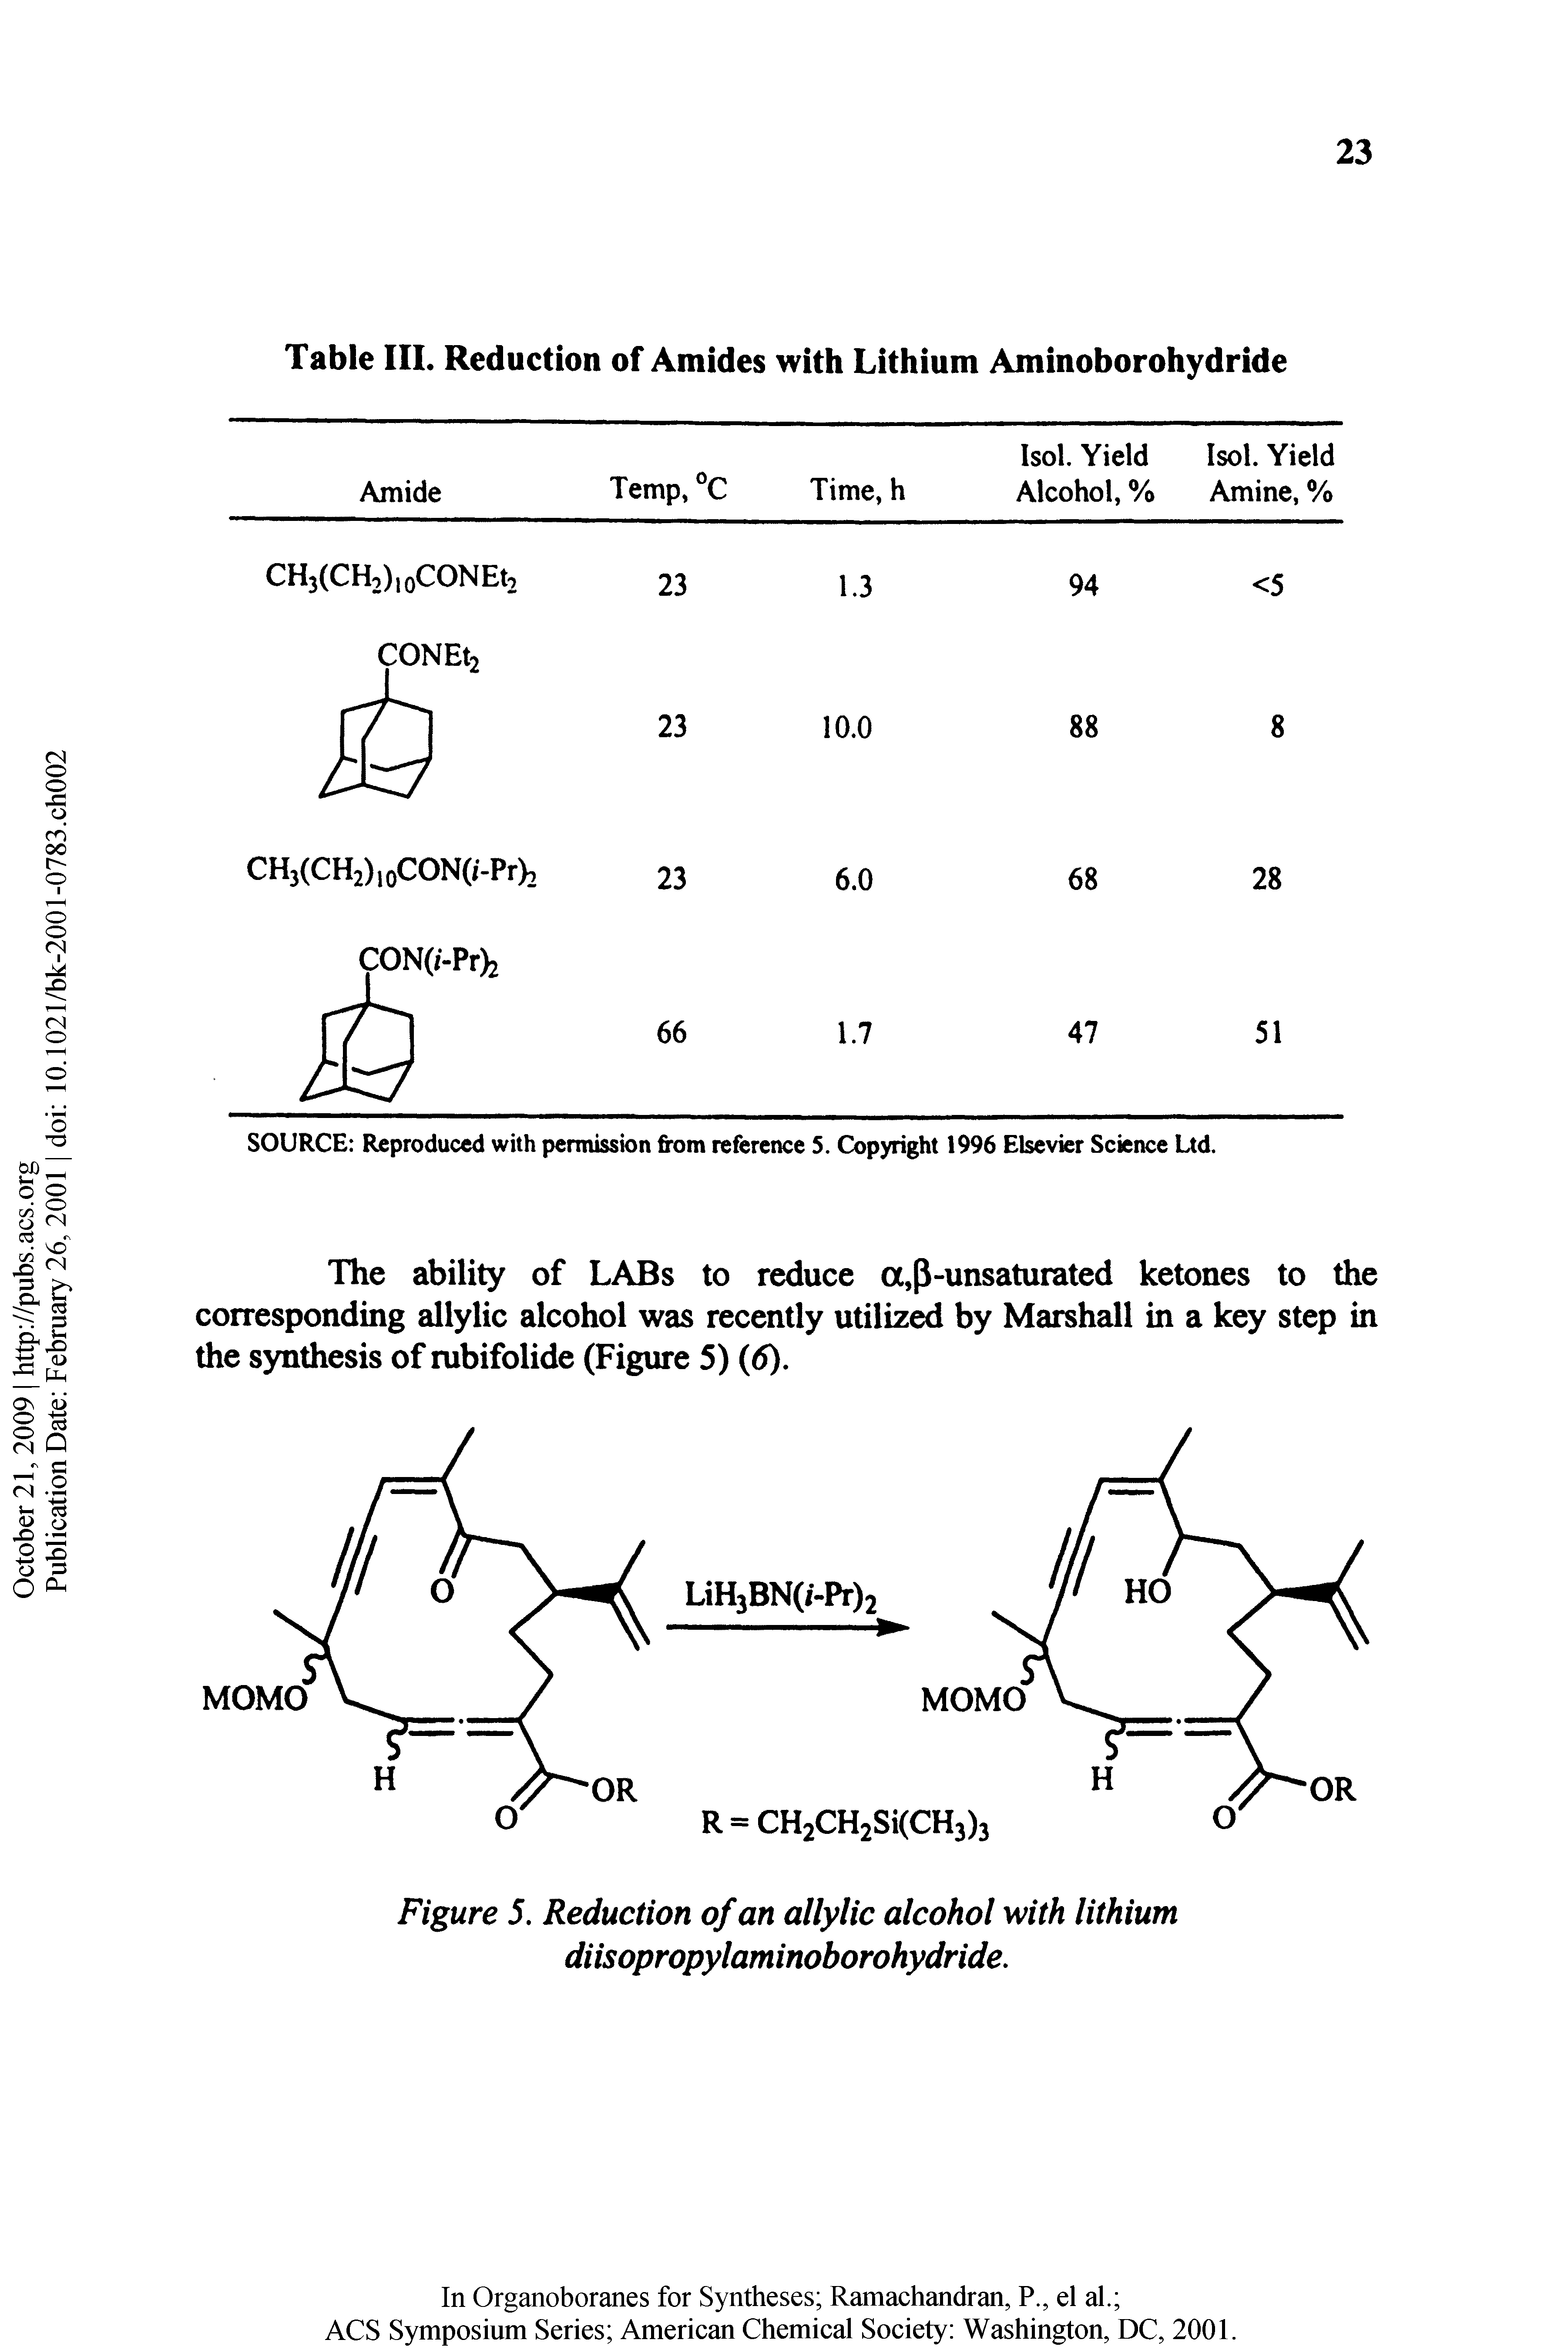 Table III. Reduction of Amides with Lithium Aminoborohydride...